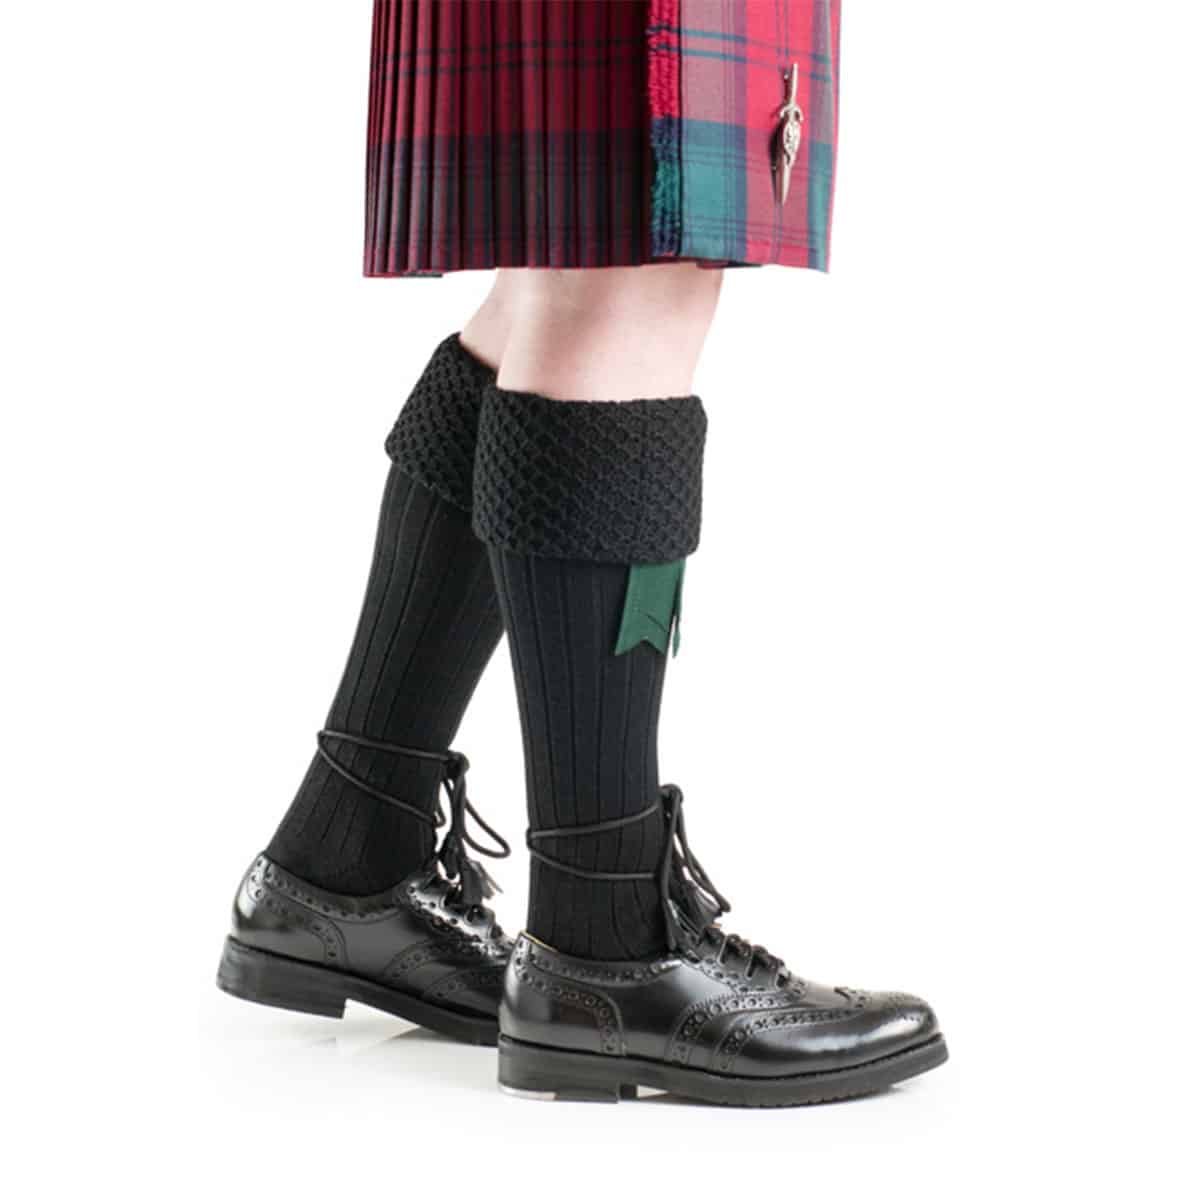 Piper Kilt Hose—Not Just for Bagpipers